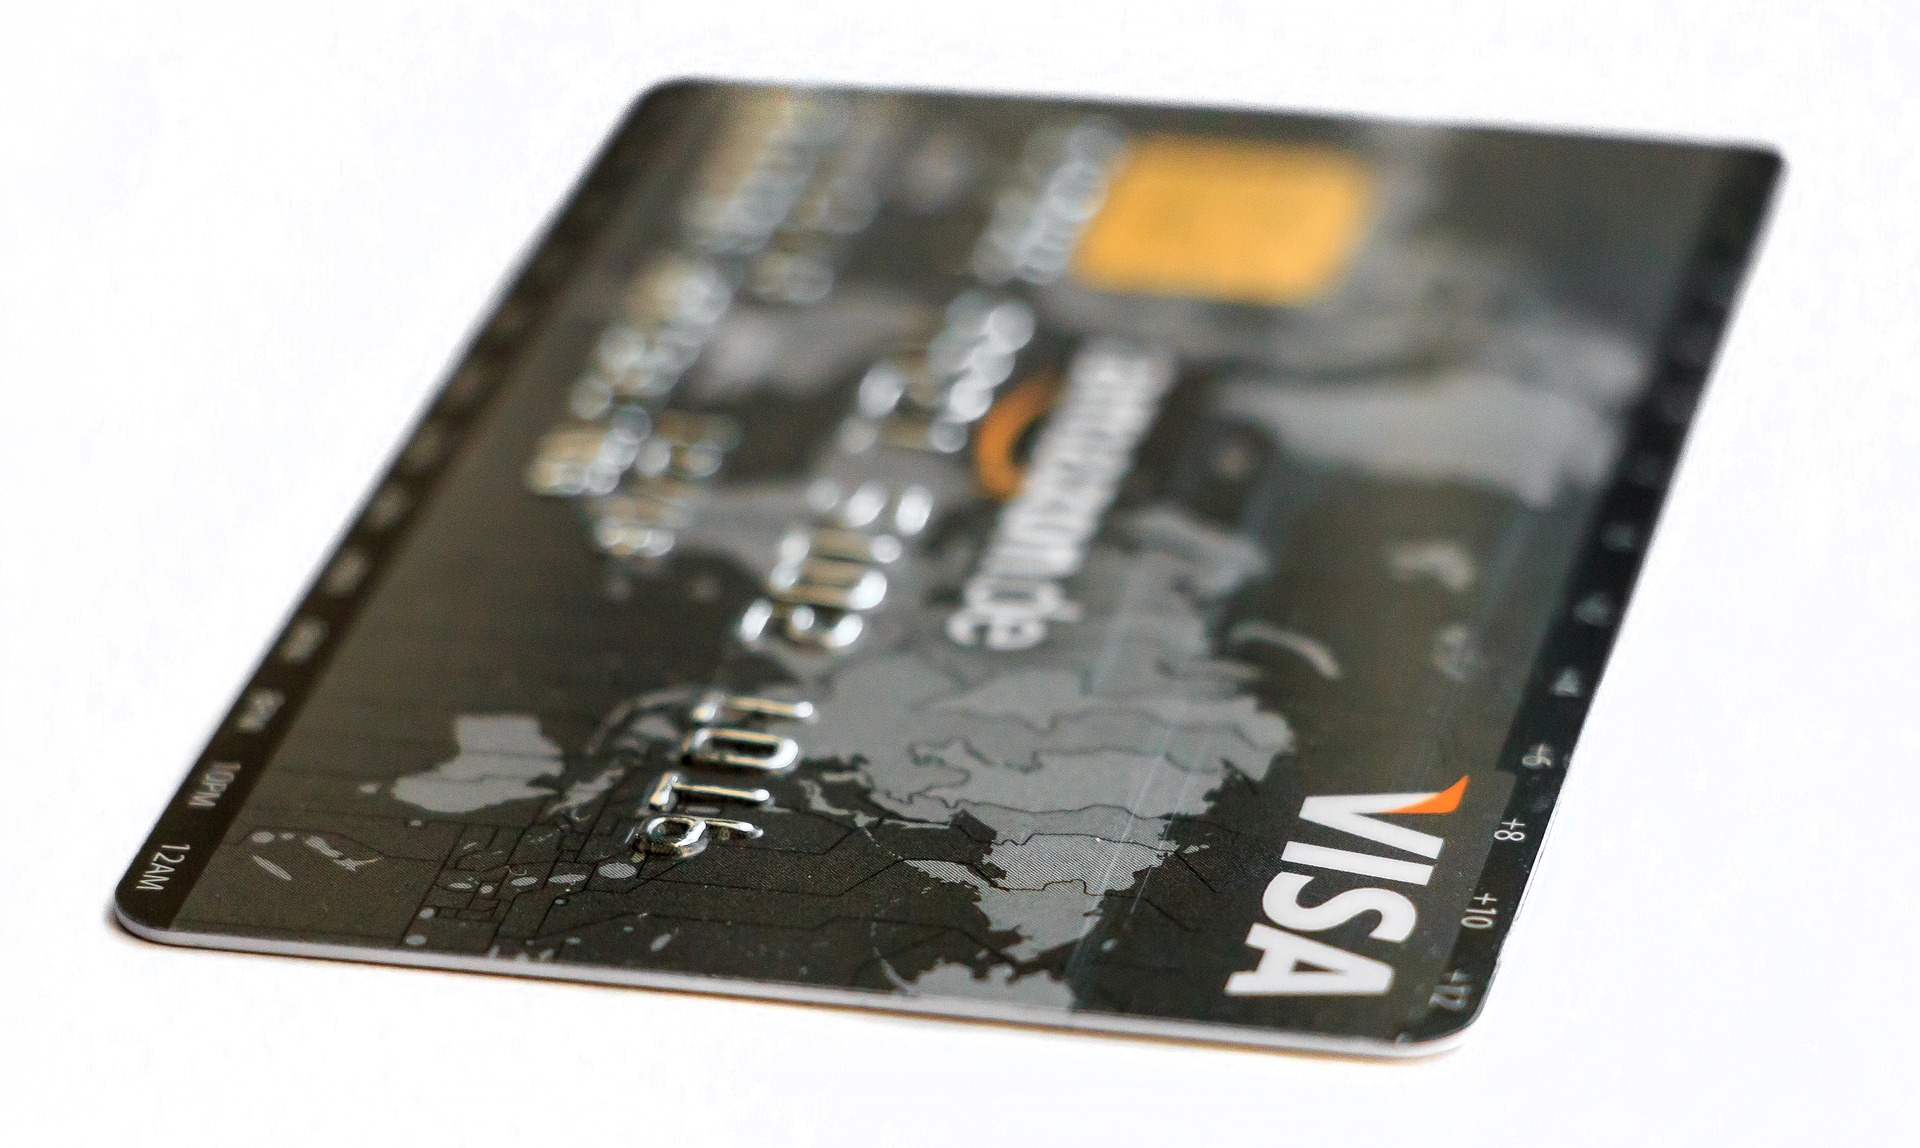 Visa Intends To Expand Support For Digital Assets Settlement Soon